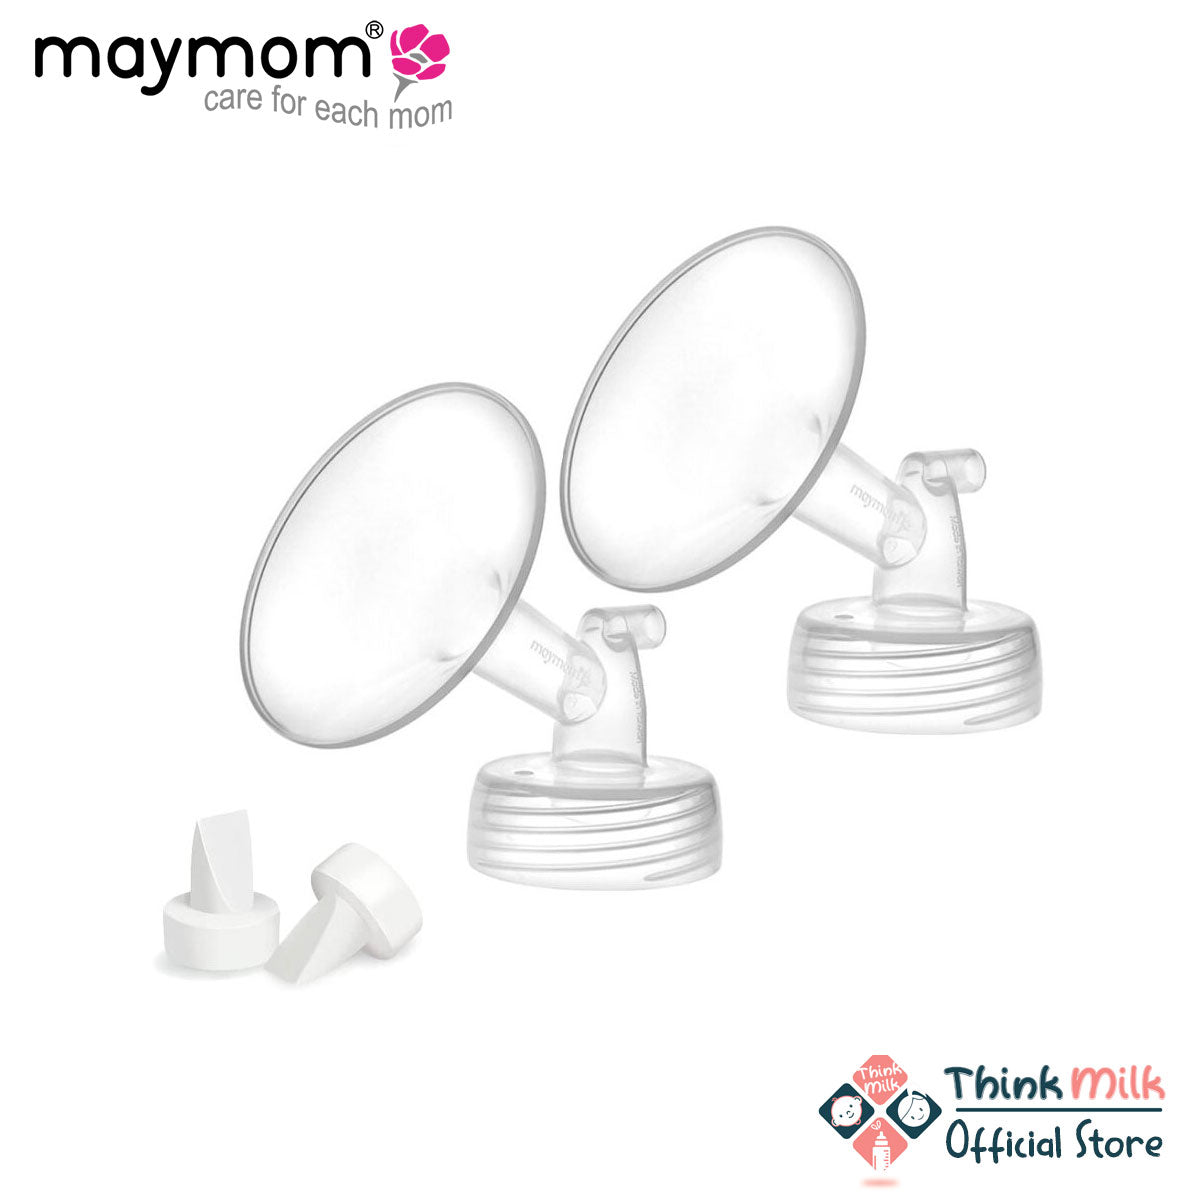 Maymom Wide Mouth Pumping Set (2pcs Wide Mouth Flanges + 2pcs Duckbills)